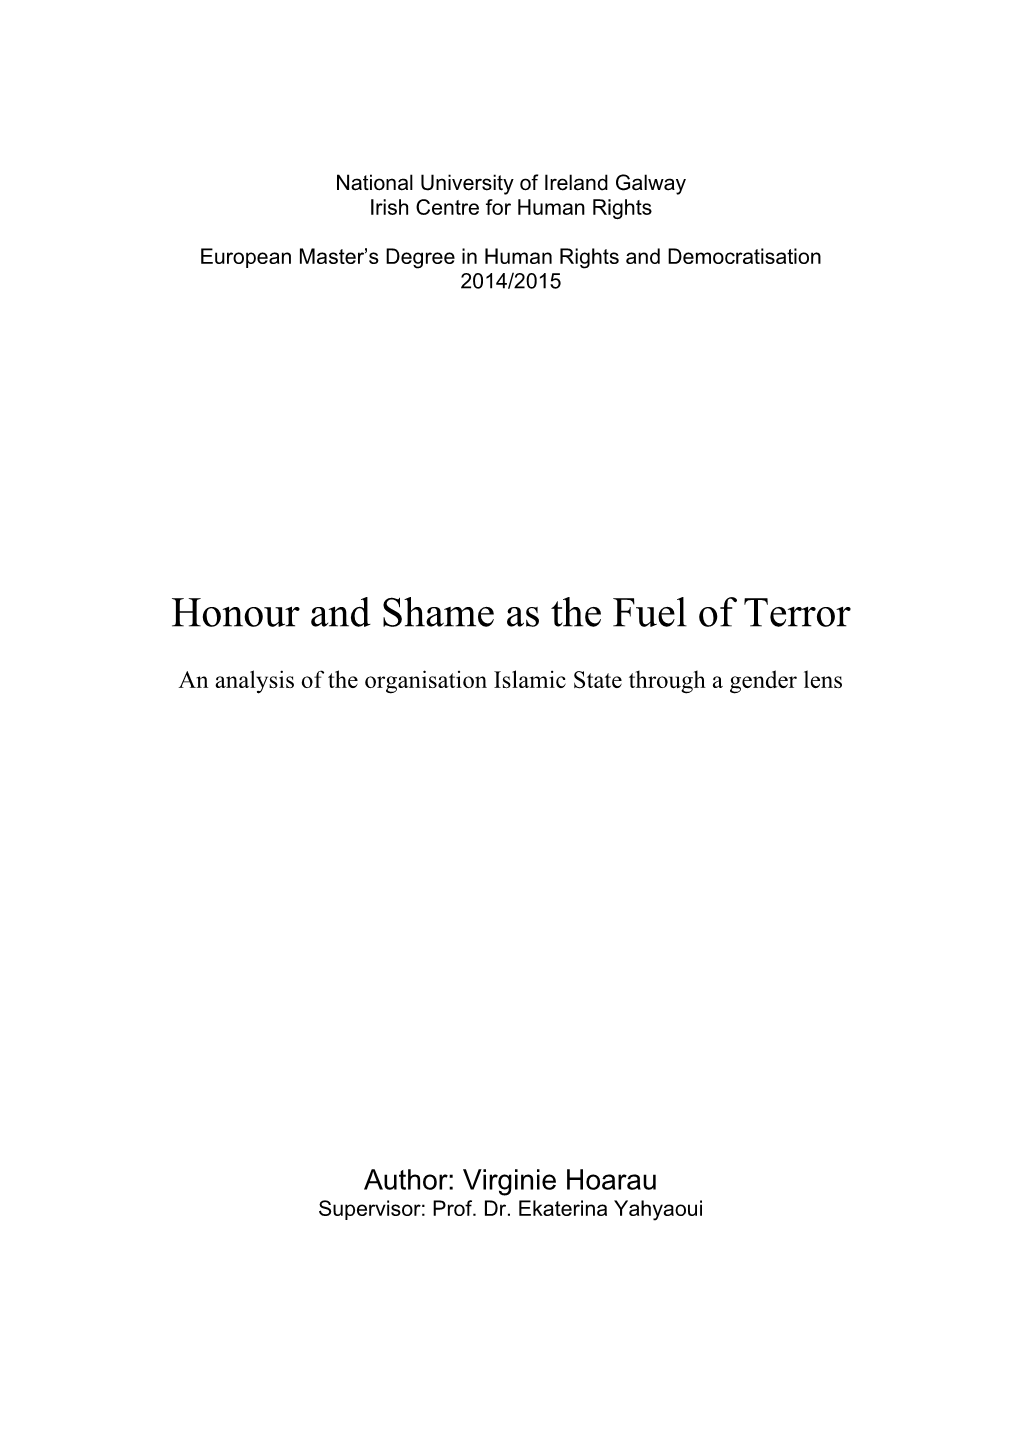 Honour and Shame As the Fuel of Terror